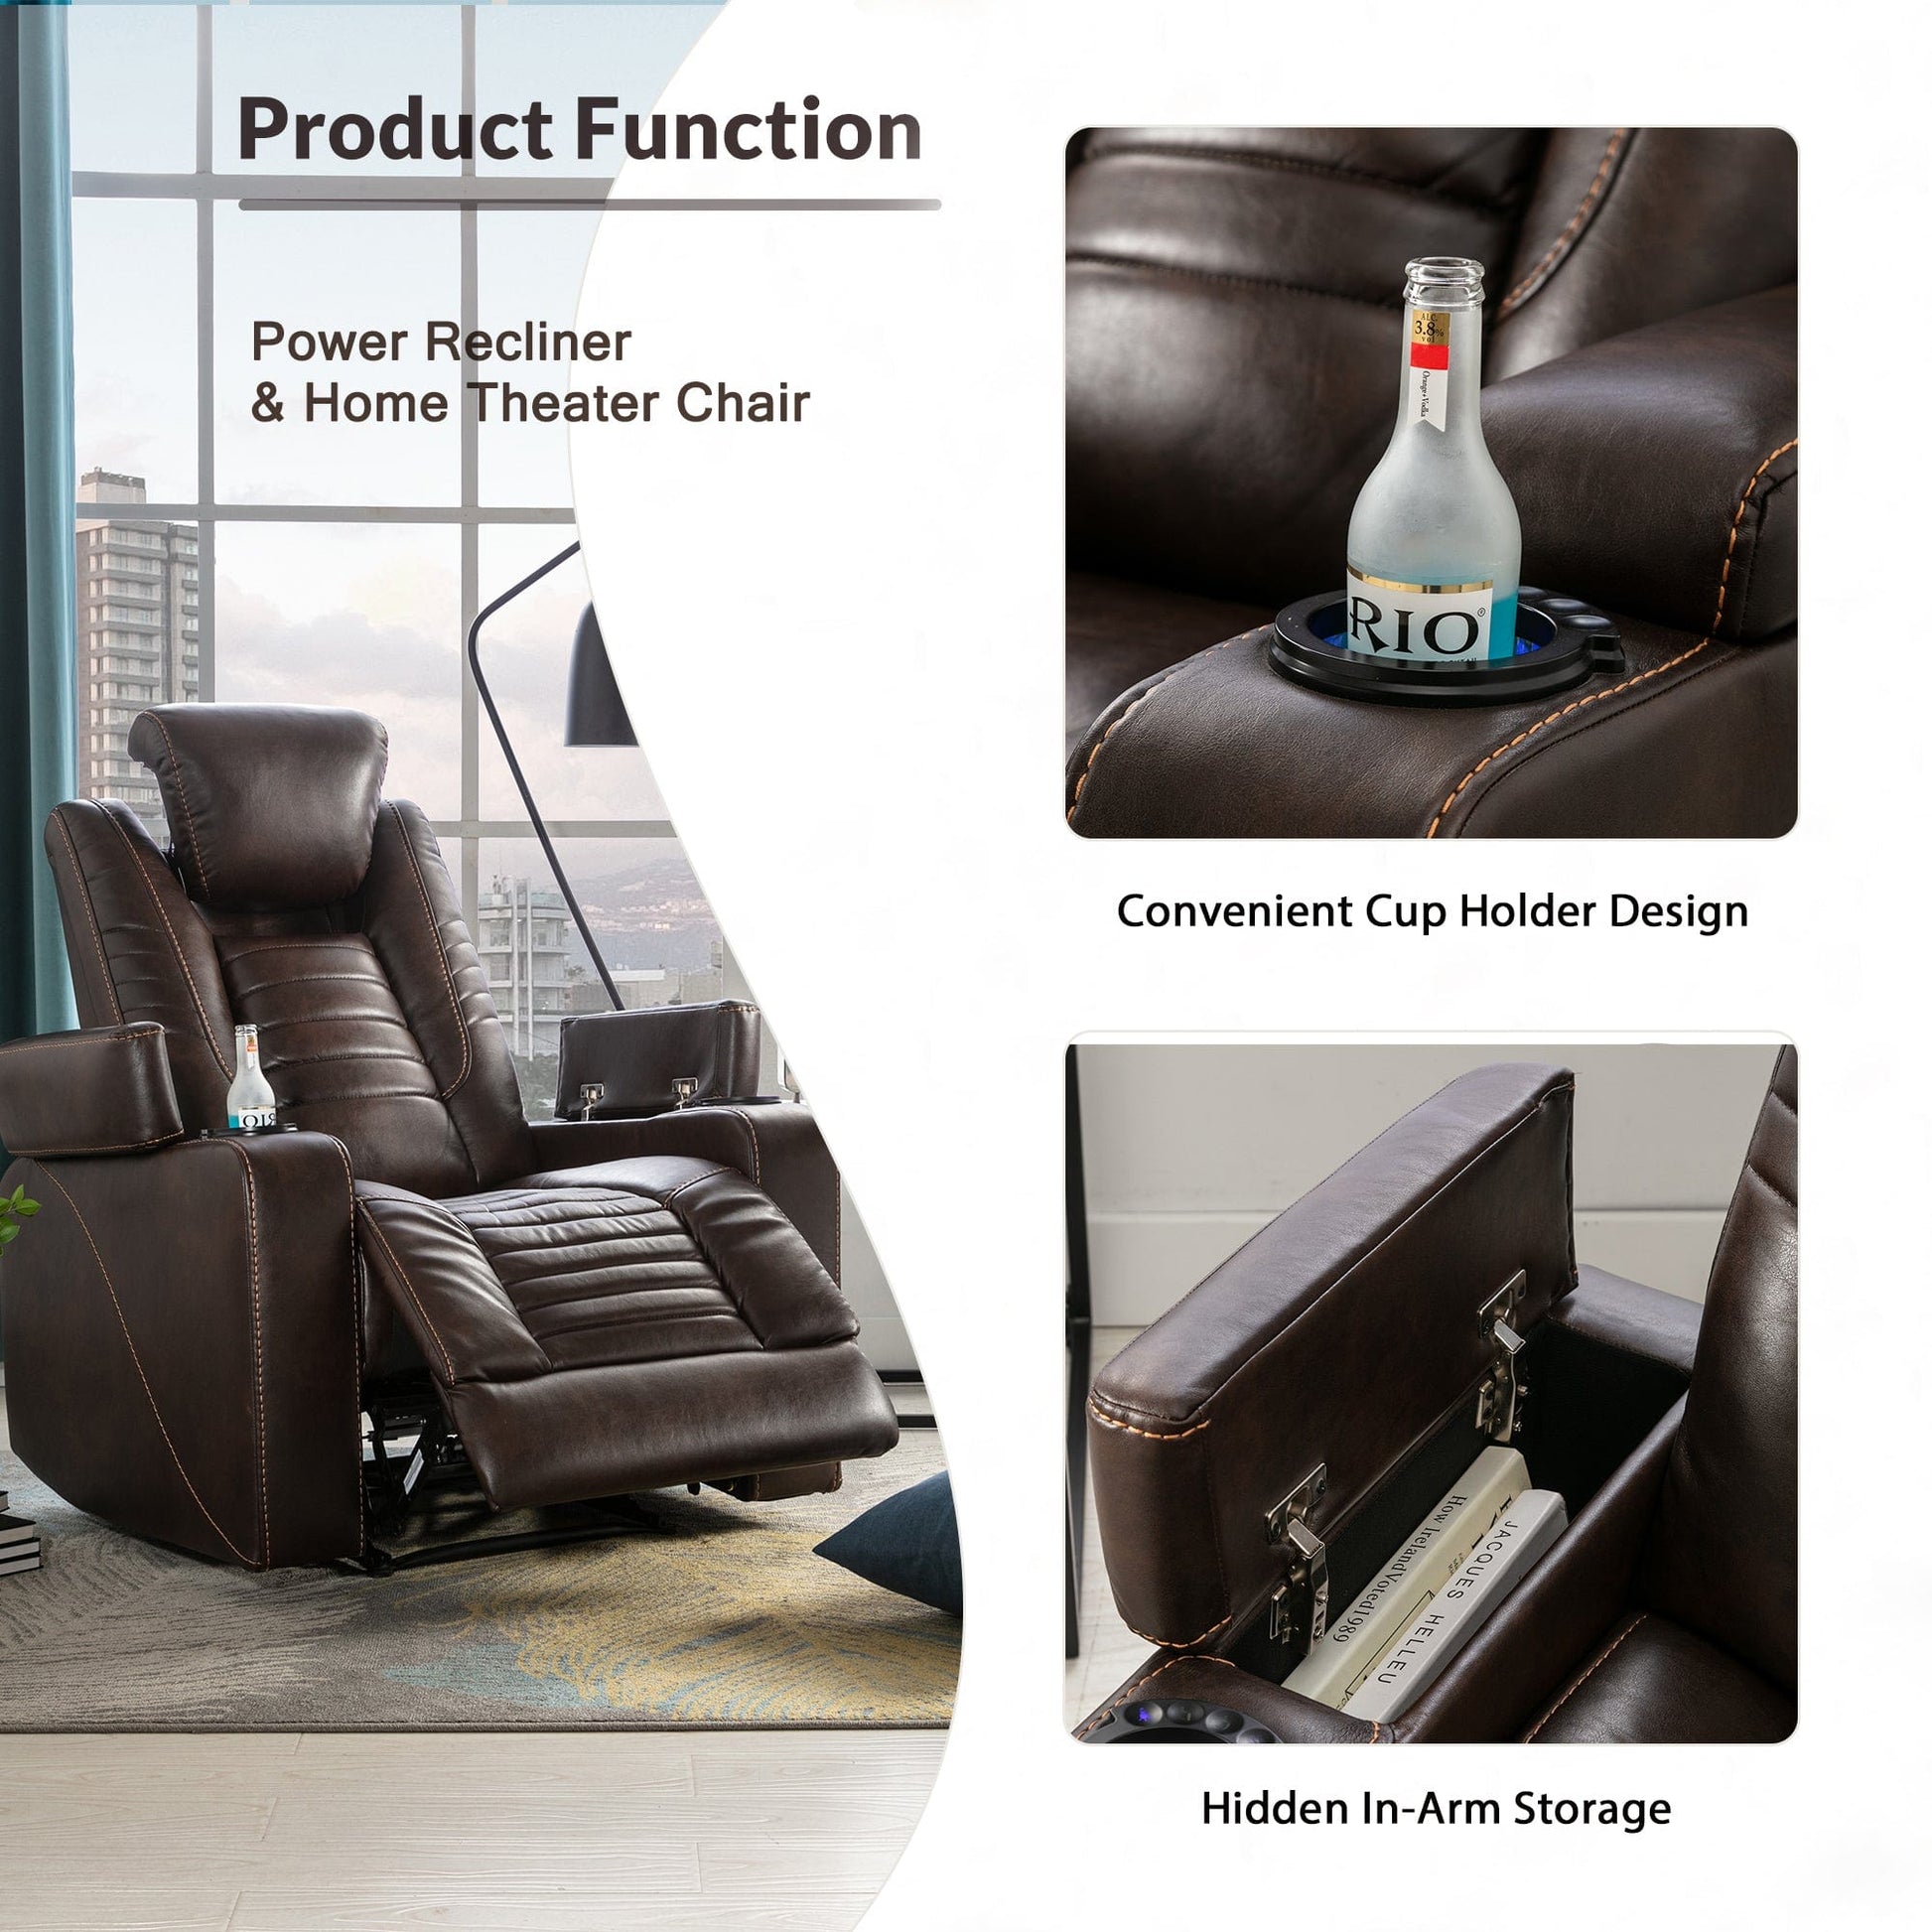 1st Choice Furniture Direct Power Motion Recliner 1st Choice Power Motion Recliner with Adjustable Head and Storage